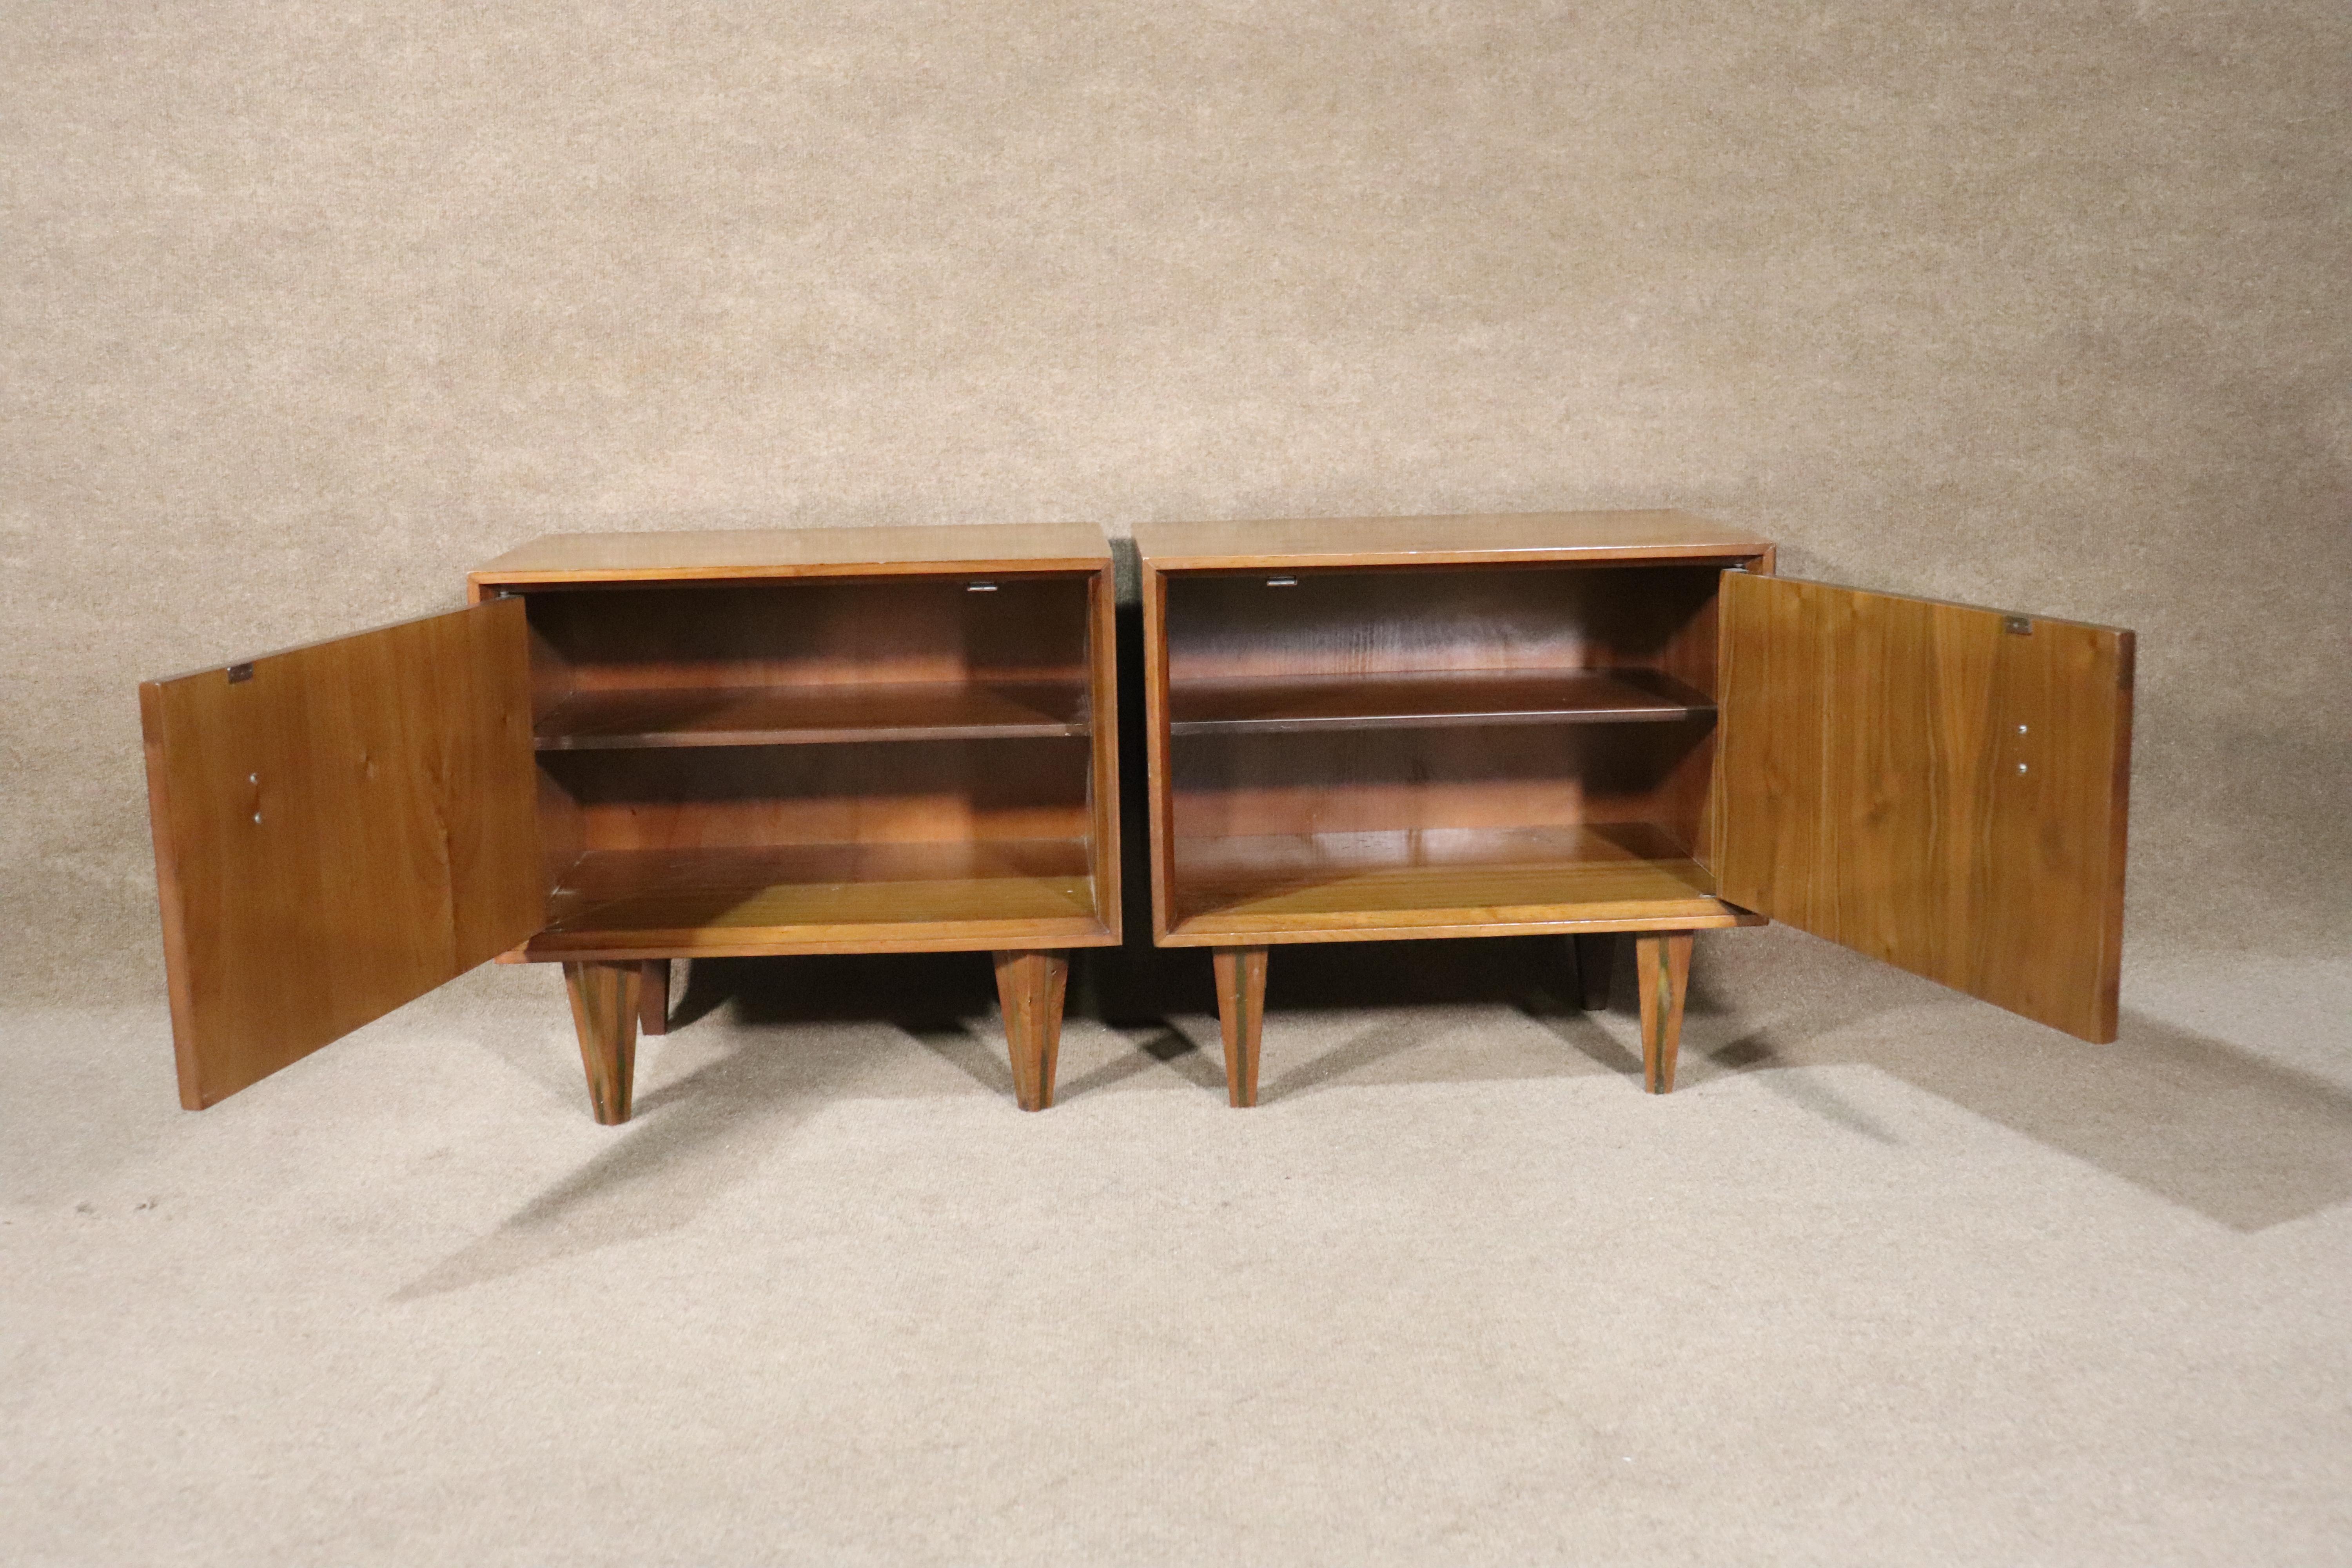 Pair of mid-century modern walnut tables with cabinet storage. Unique design with sculpted handles and brass inlay legs.
Please confirm location.